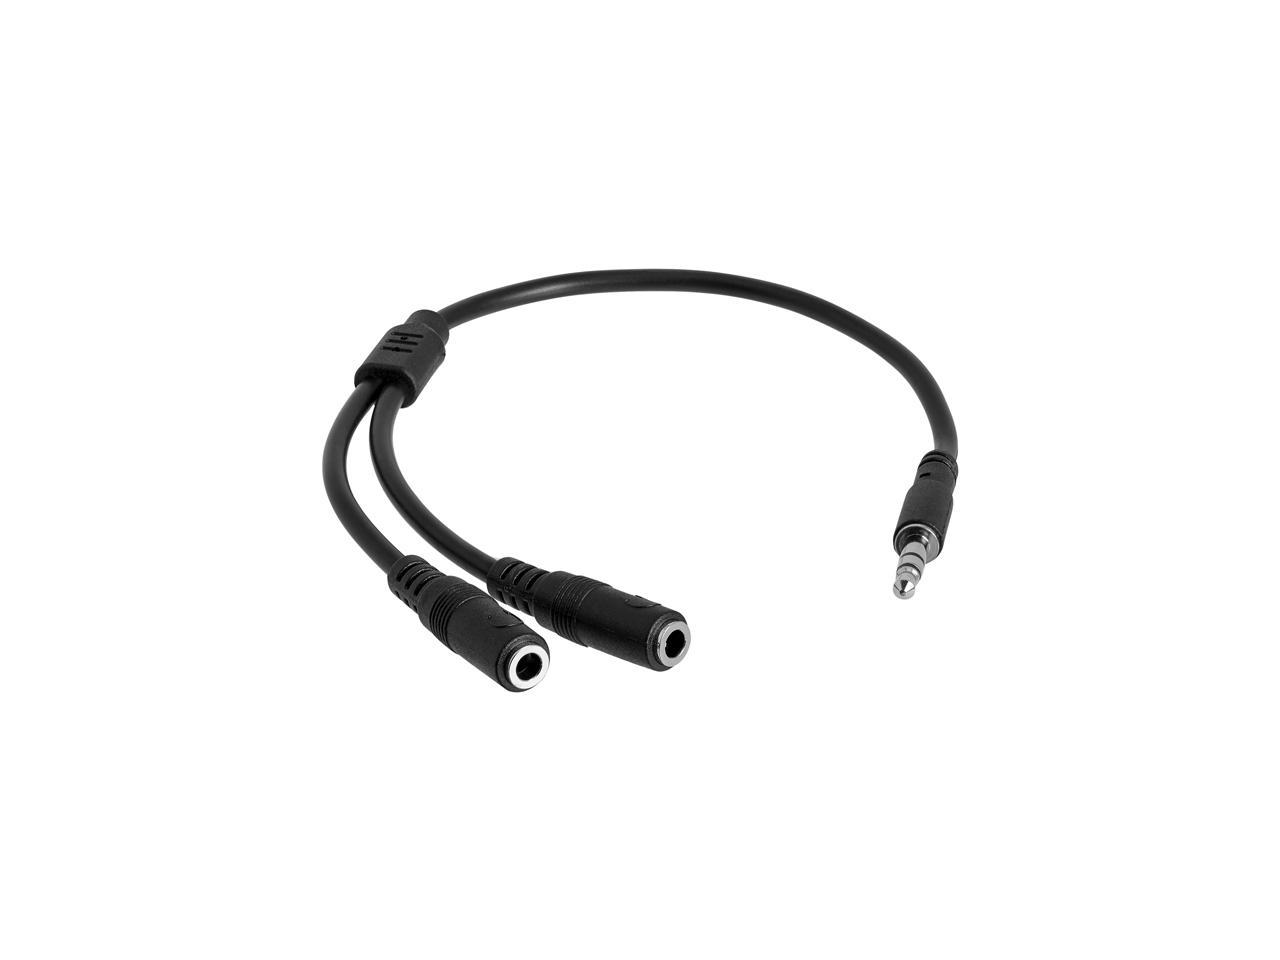 StarTech.com MUY1MFFS Slim Stereo Splitter Cable - 3.5mm Male to 2x 3.5mm Female - Slim Phono Stereo Y Cable - image 1 of 5